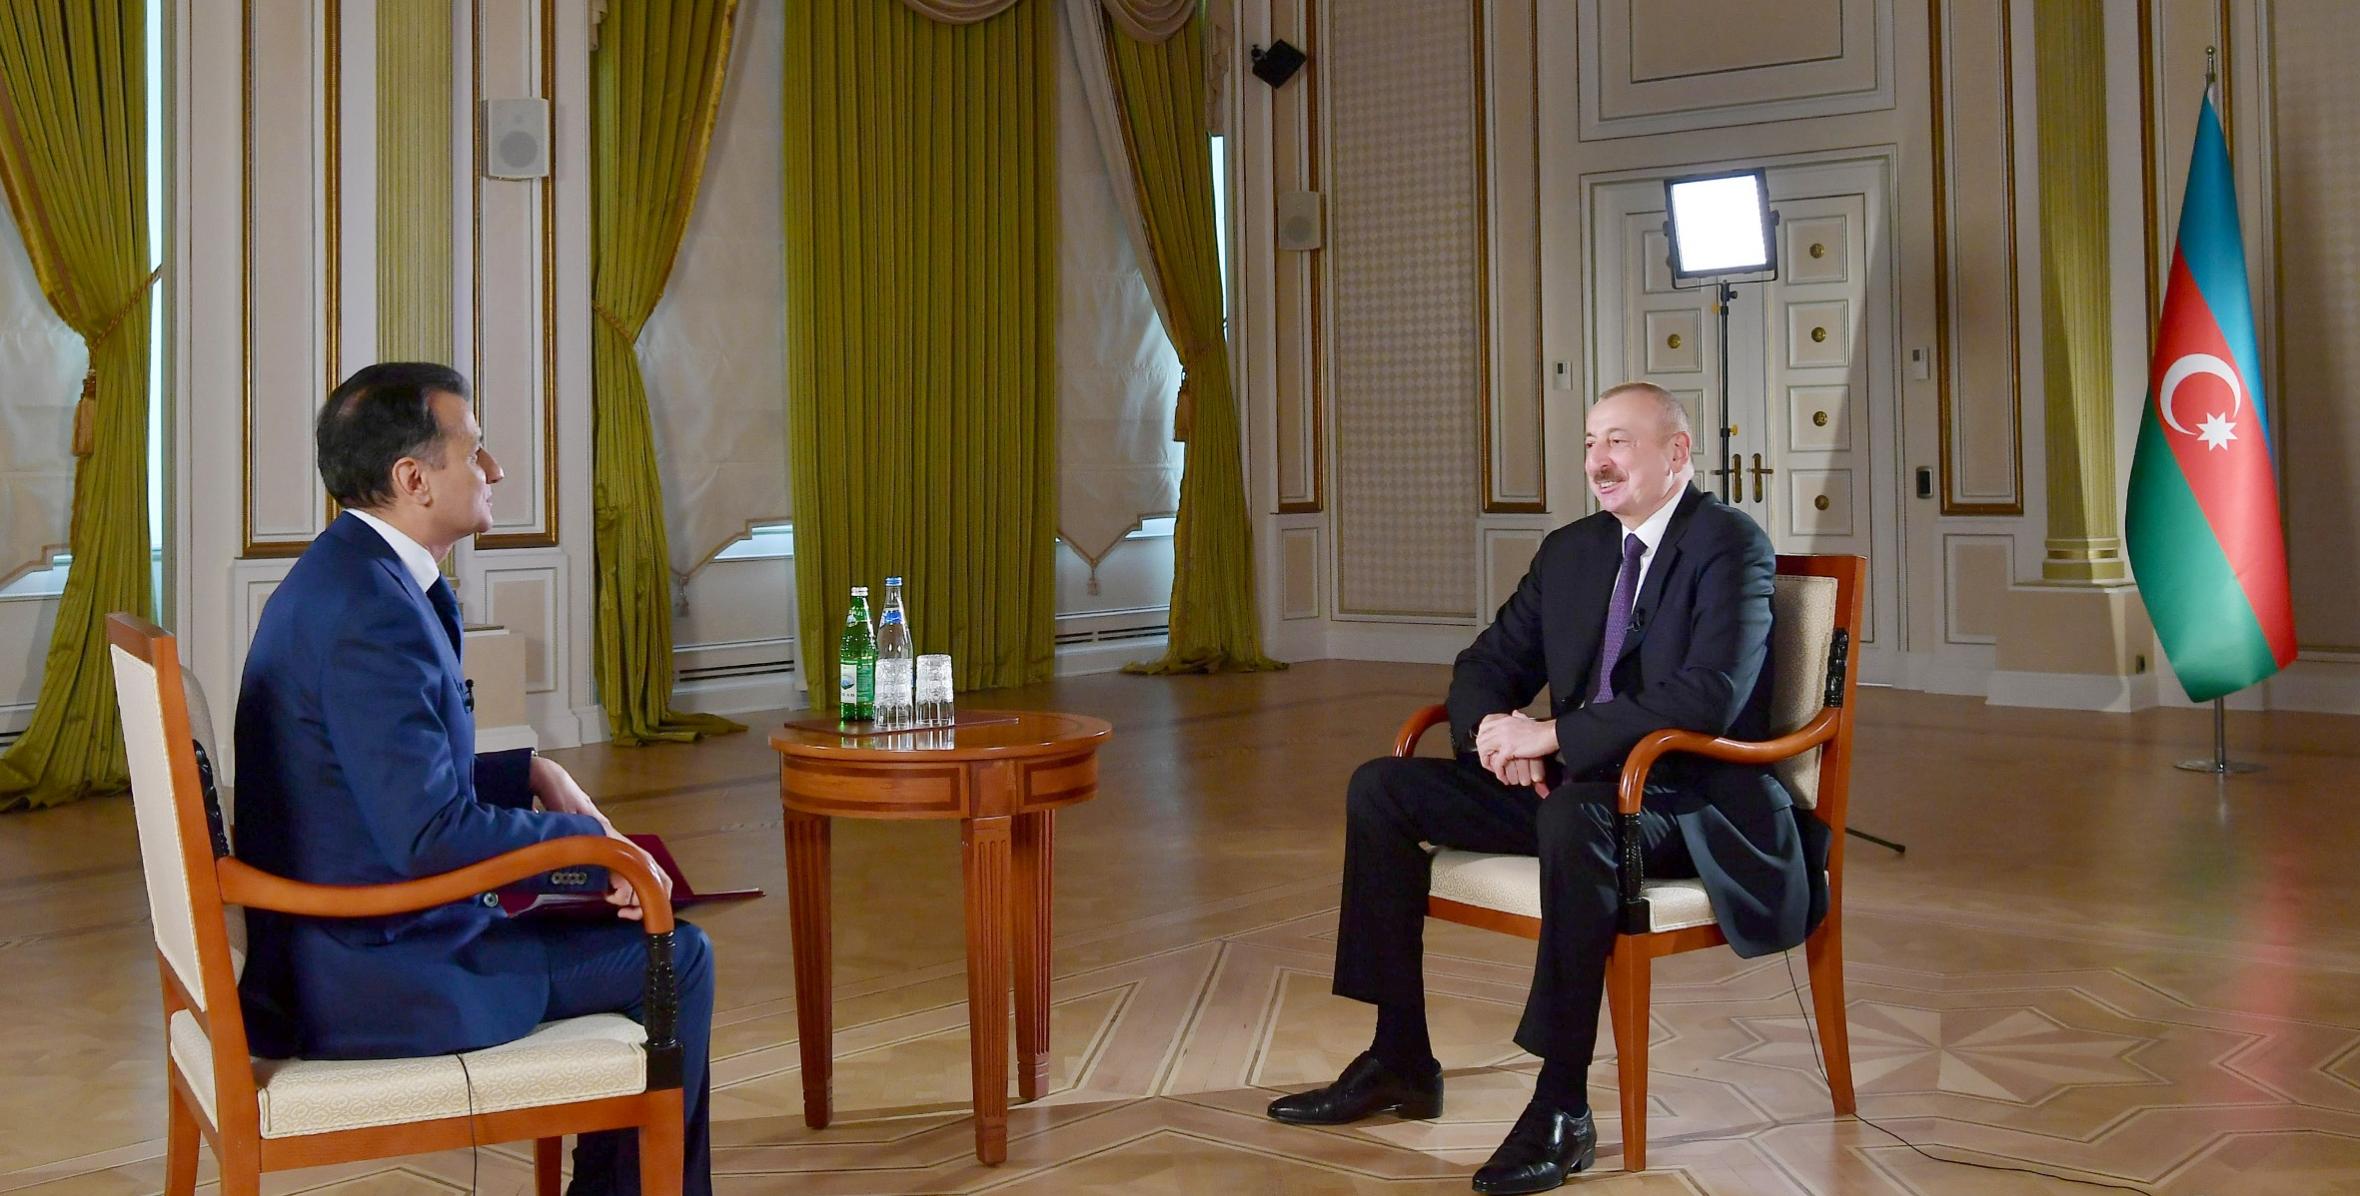 Ilham Aliyev was interviewed by Real TV